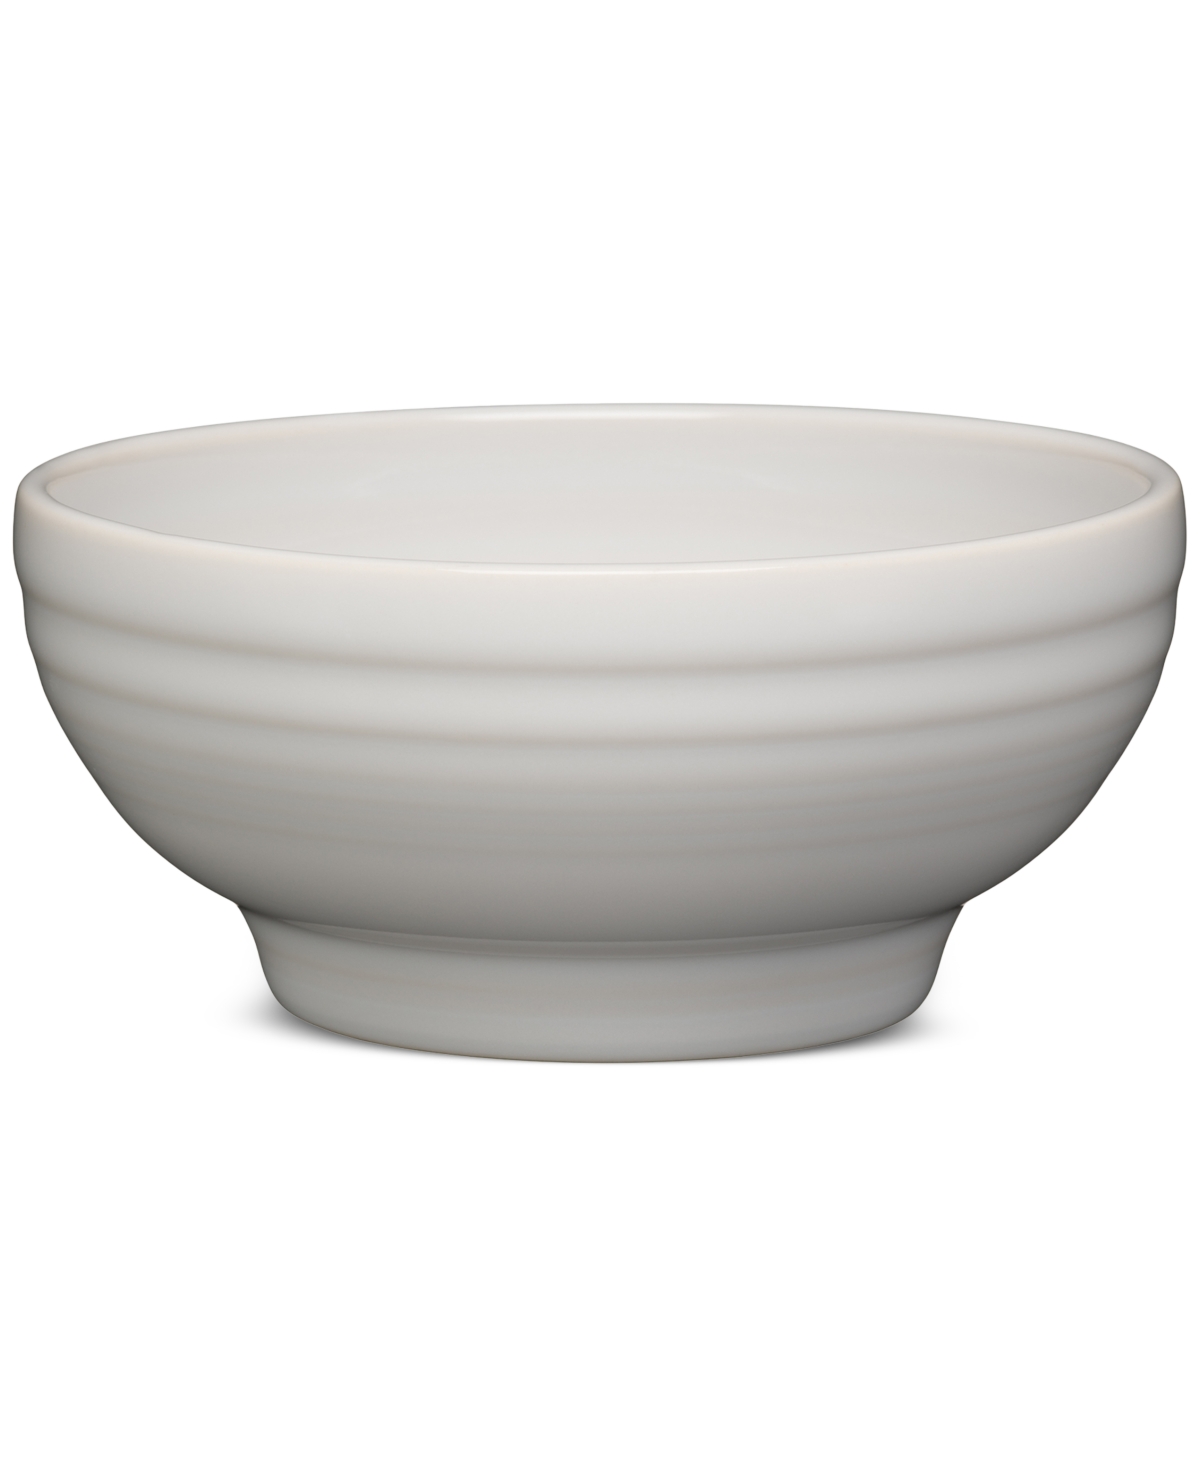 Small Footed Bowl 22 oz. - Peony